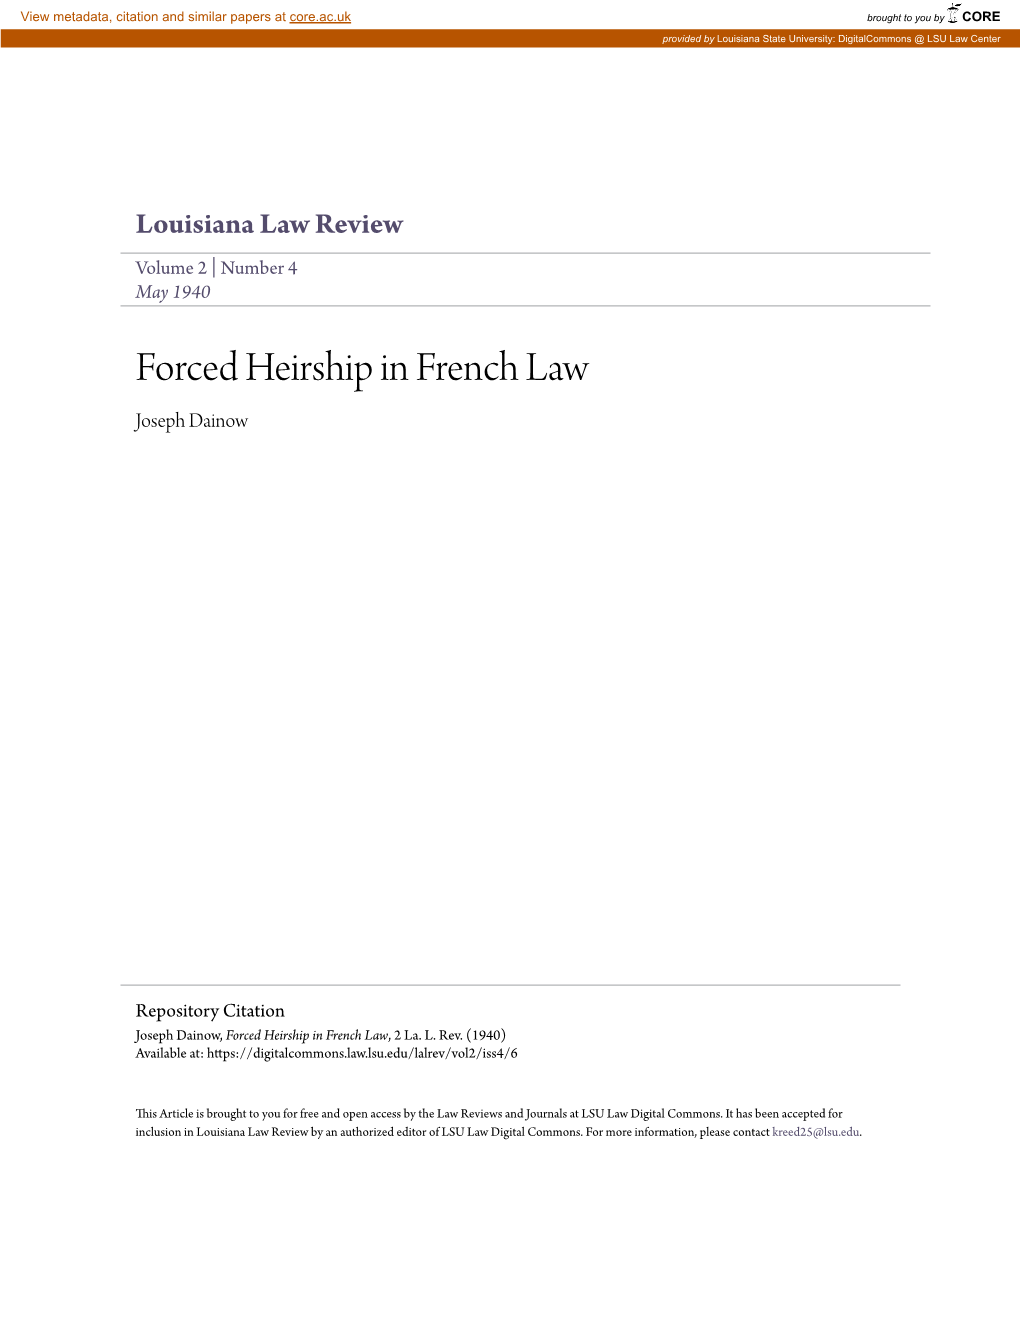 Forced Heirship in French Law Joseph Dainow